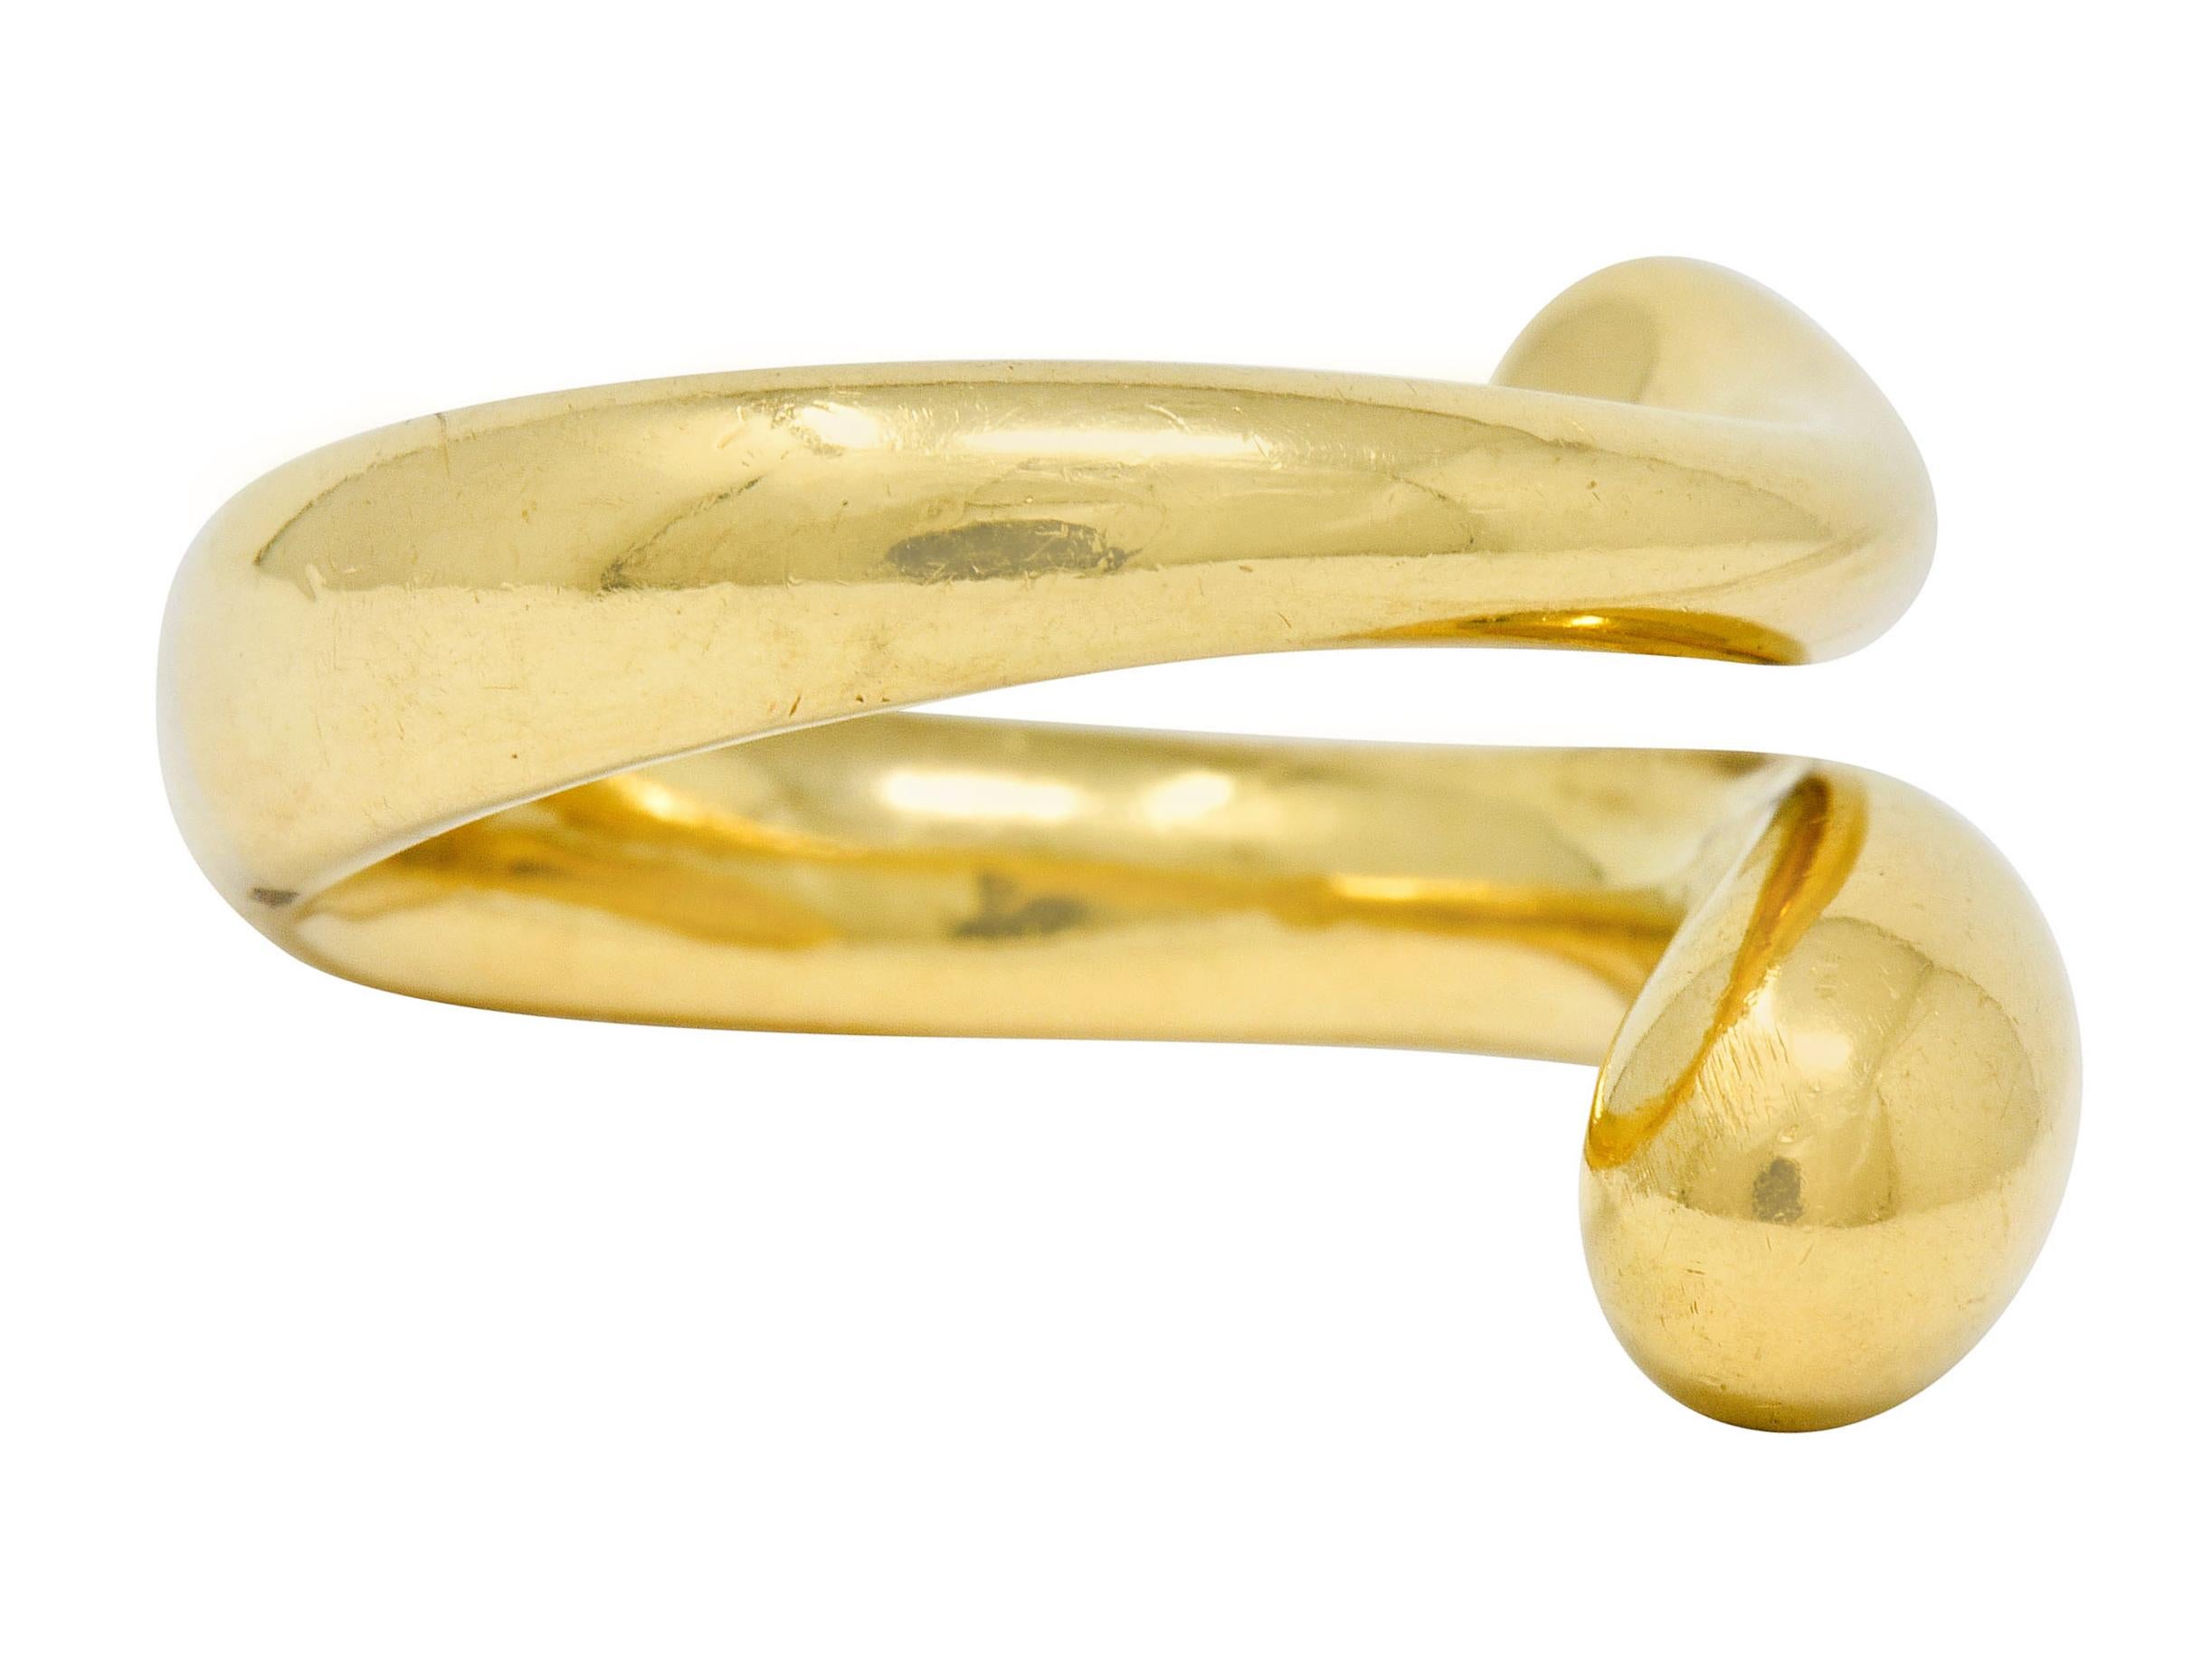 Bypass style ring terminating as two swollen drop-like ends

Organically wraps around finger with a bright finish

Fully signed Tiffany & Co. Elsa Peretti Spain

Stamped 750 for 18 karat gold

From the Teardrop collection, circa 1990s

Ring Size: 6